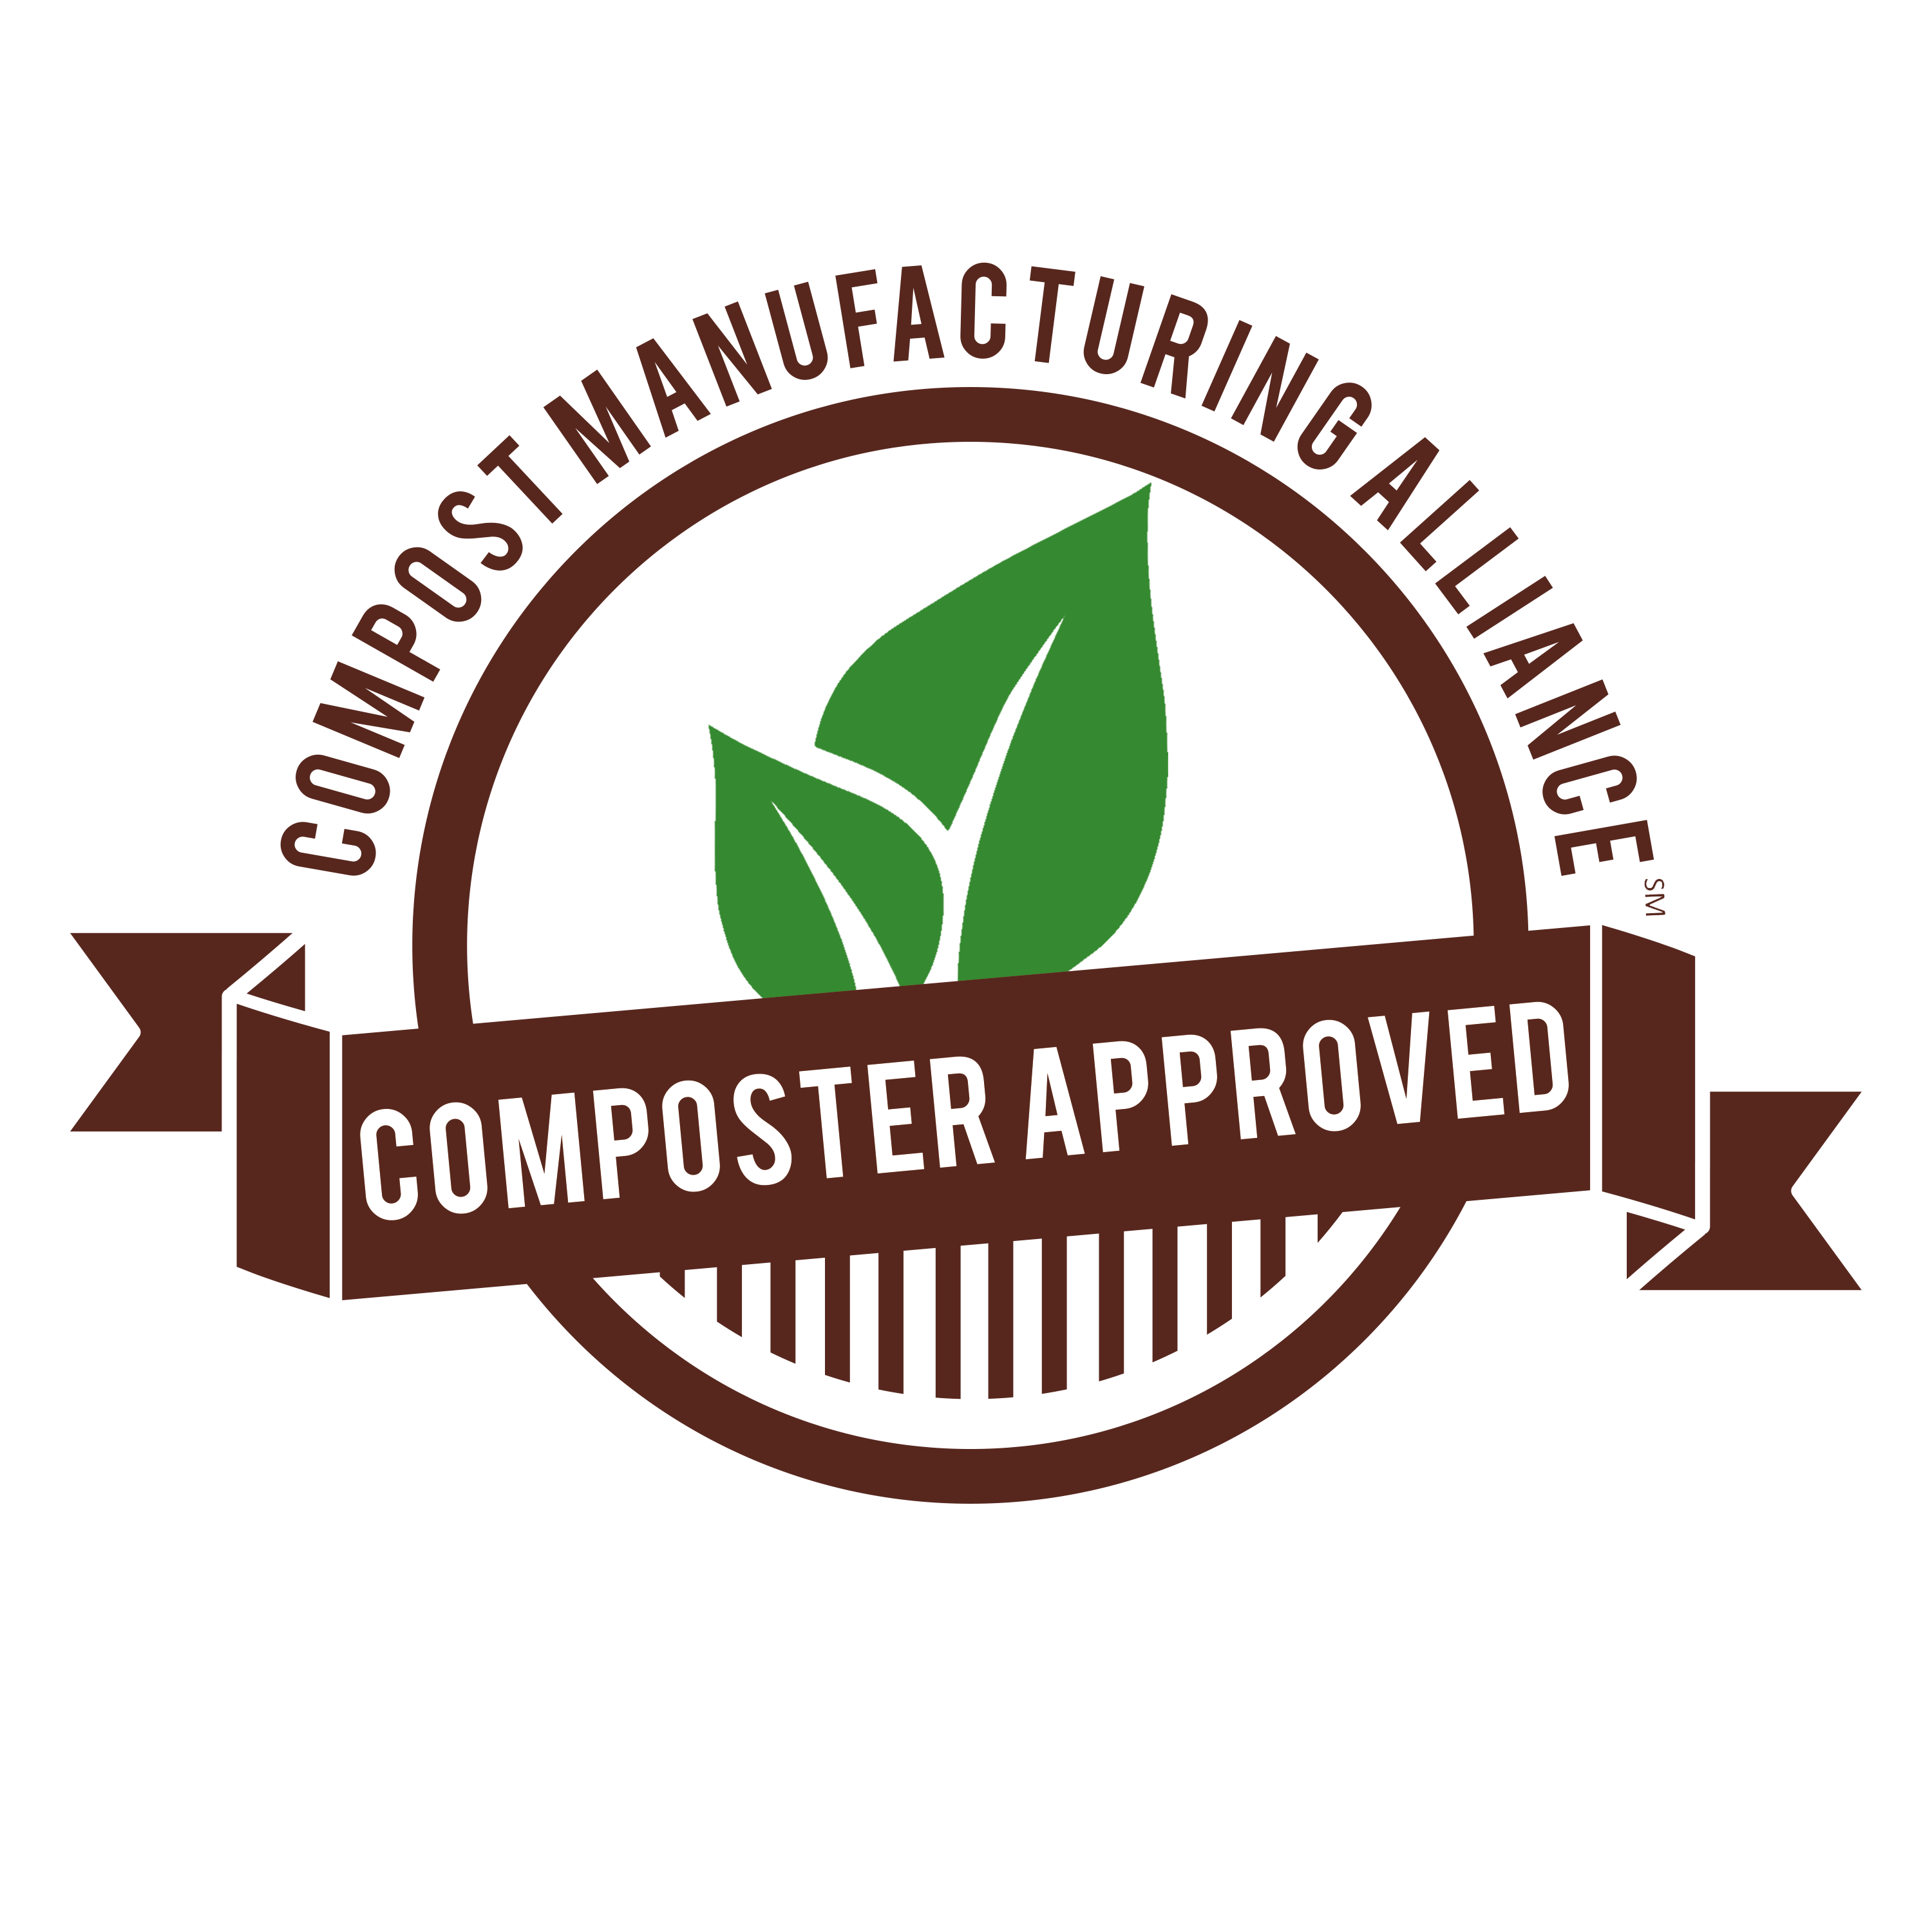 Compost Logo - Compost Manufacturing Alliance – Composter Approved